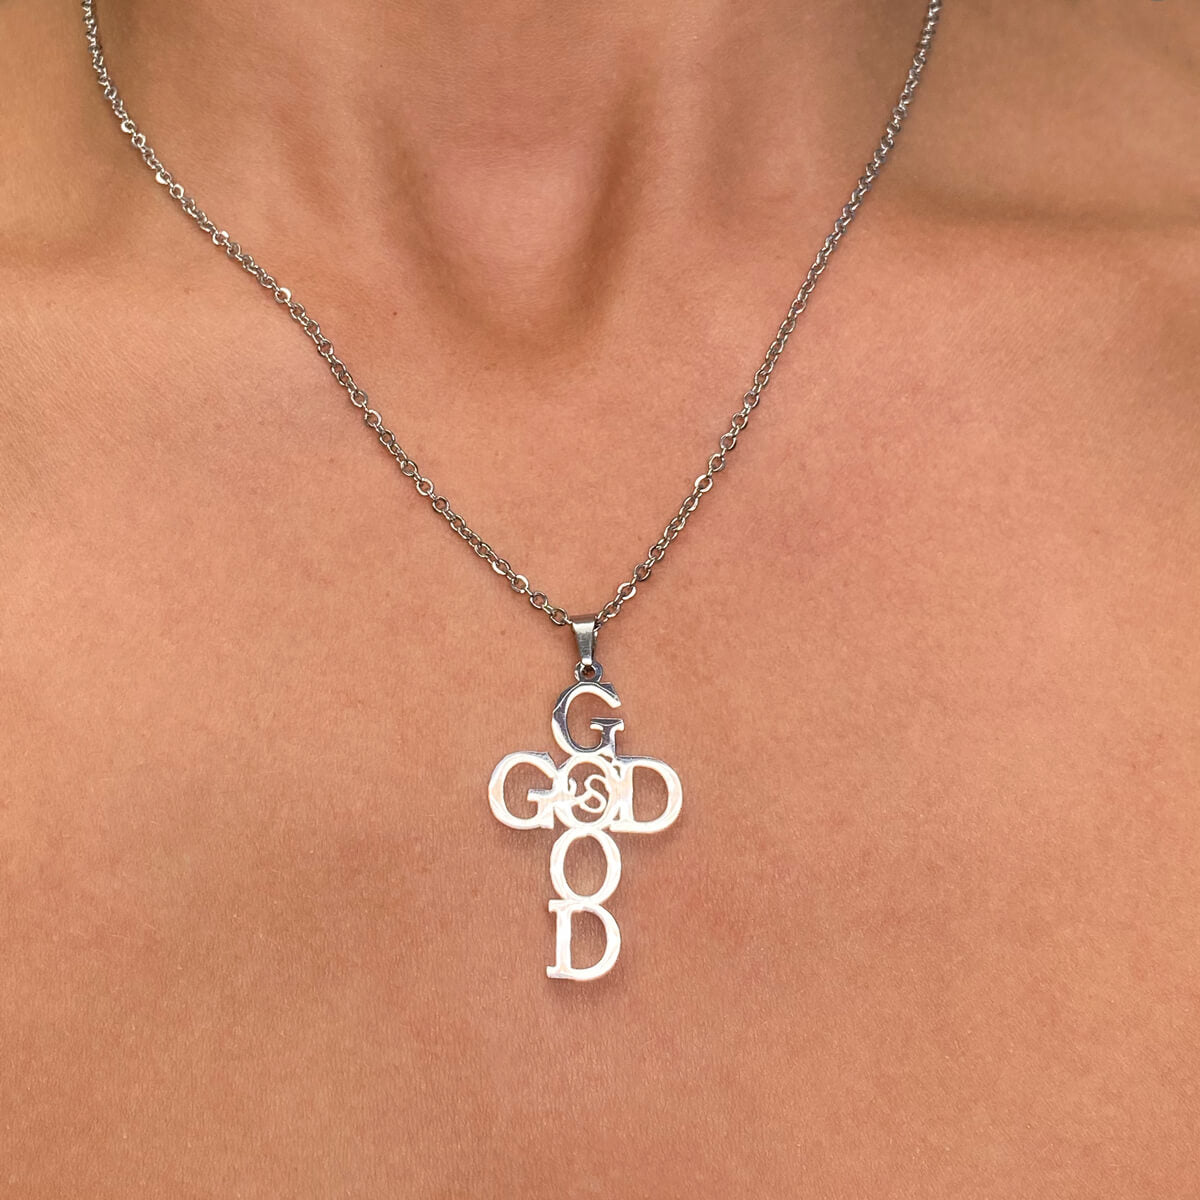 God is Good Cross Necklace Stainless Steel Jewelry